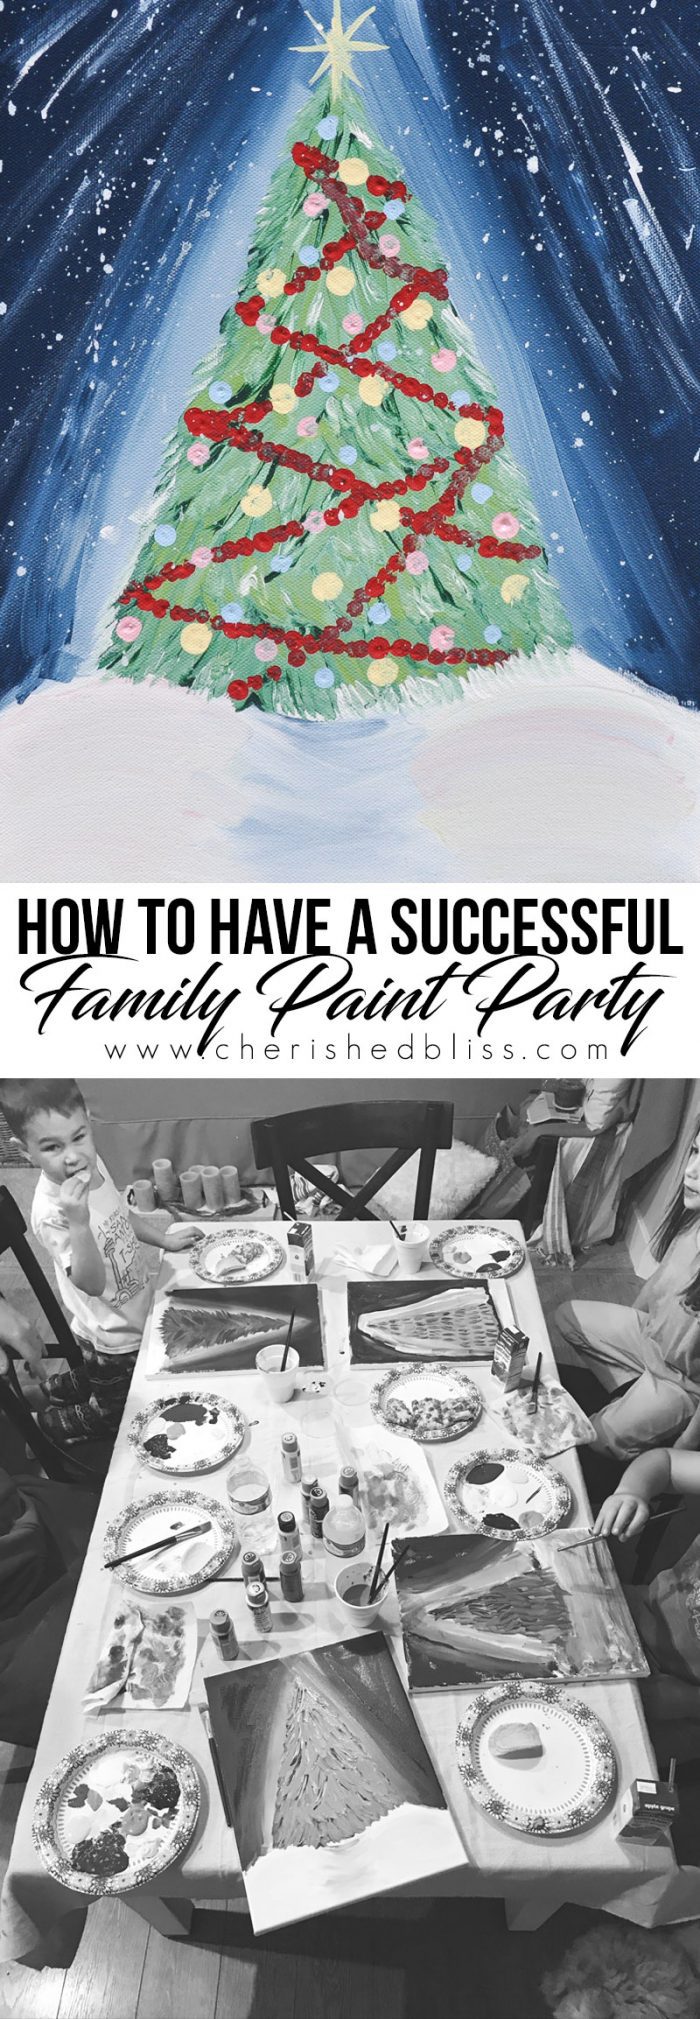 Create special memories by joining this fun Paint With Plaid Night. These tips will help provide a Successful Family Paint Party! 